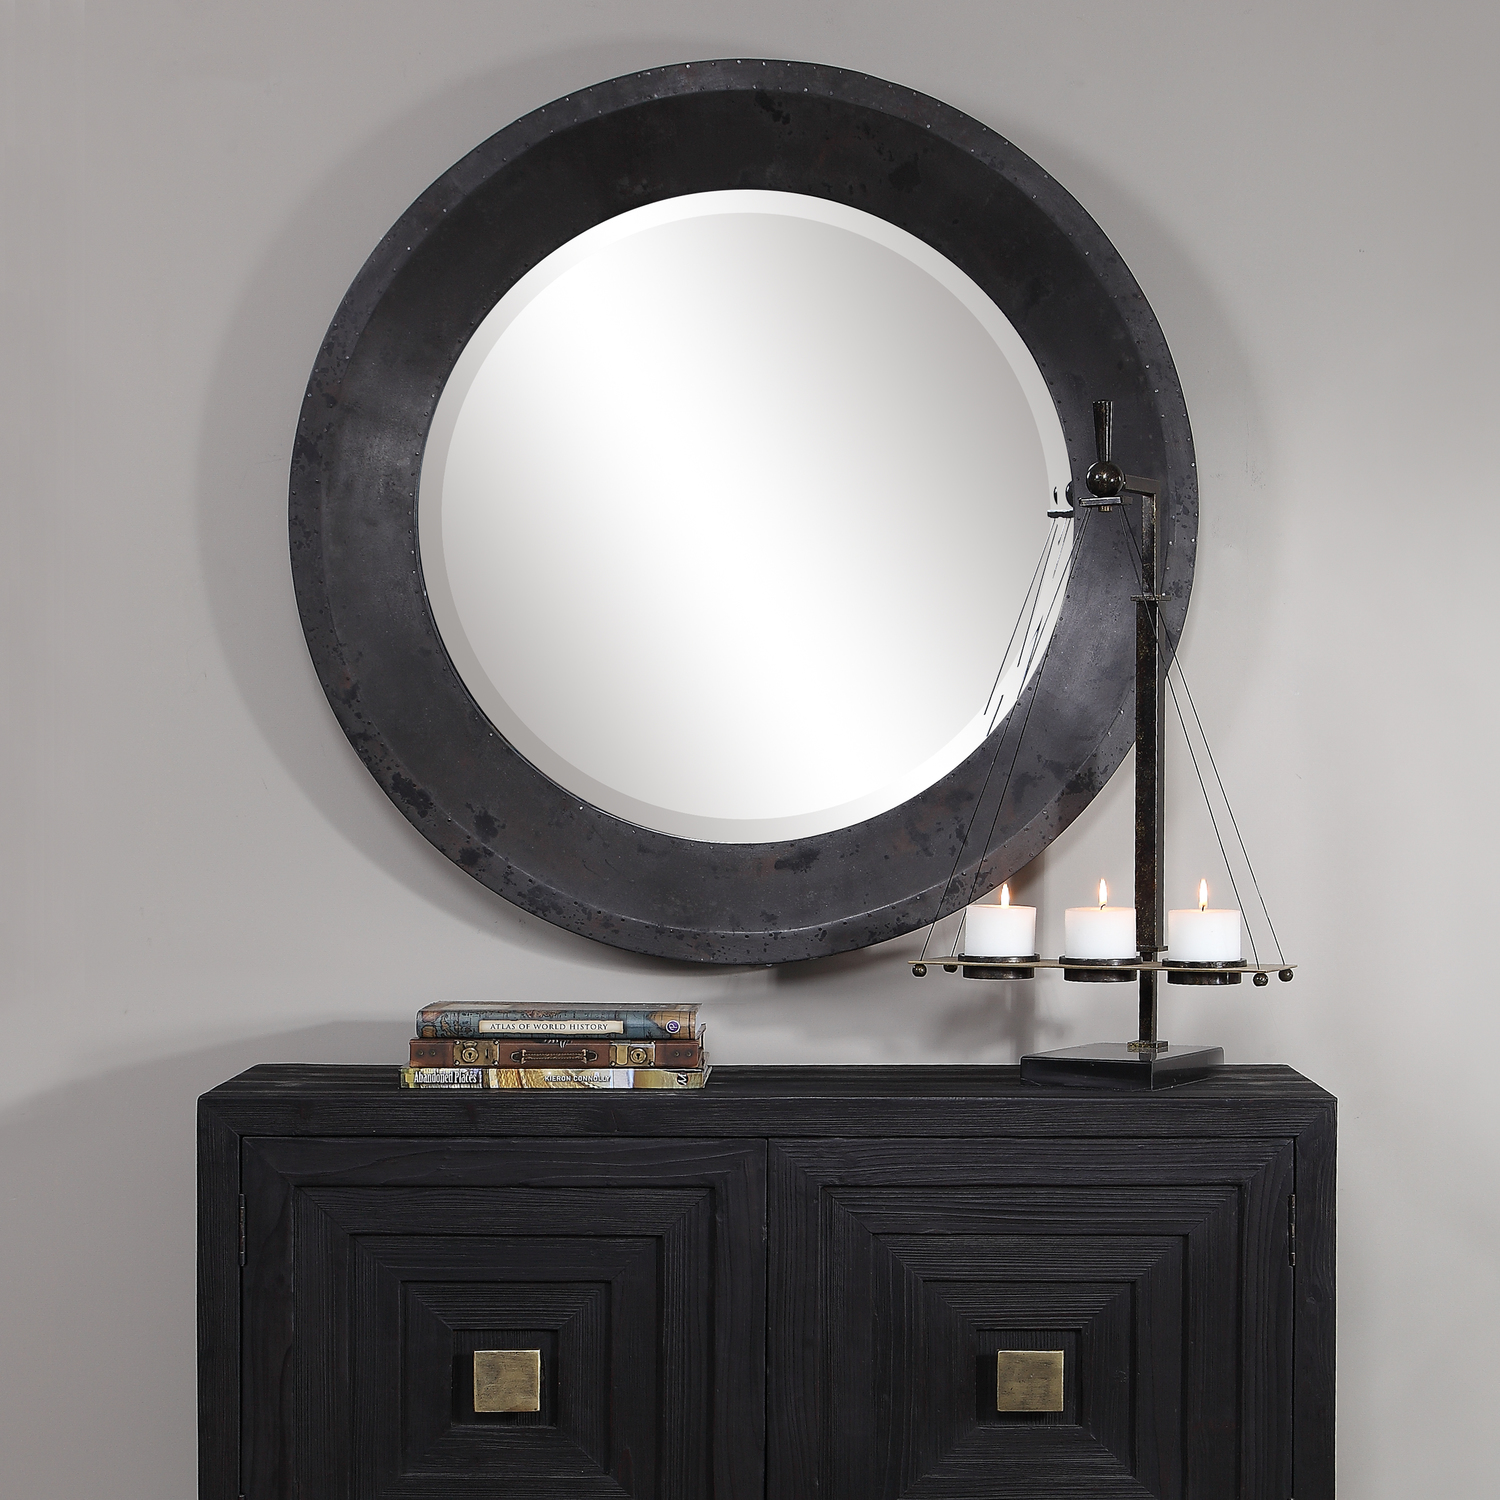 mirror furniture design Uttermost Round Mirror Showcasing An Industrial Style, This Round Mirror Is Paired With An Oxidized Metal Frame In Dark Gray, Silver, Charcoal, And Rust Tones With Nail Accents. A Generous 1 1/4" Bevel Completes This Piece.